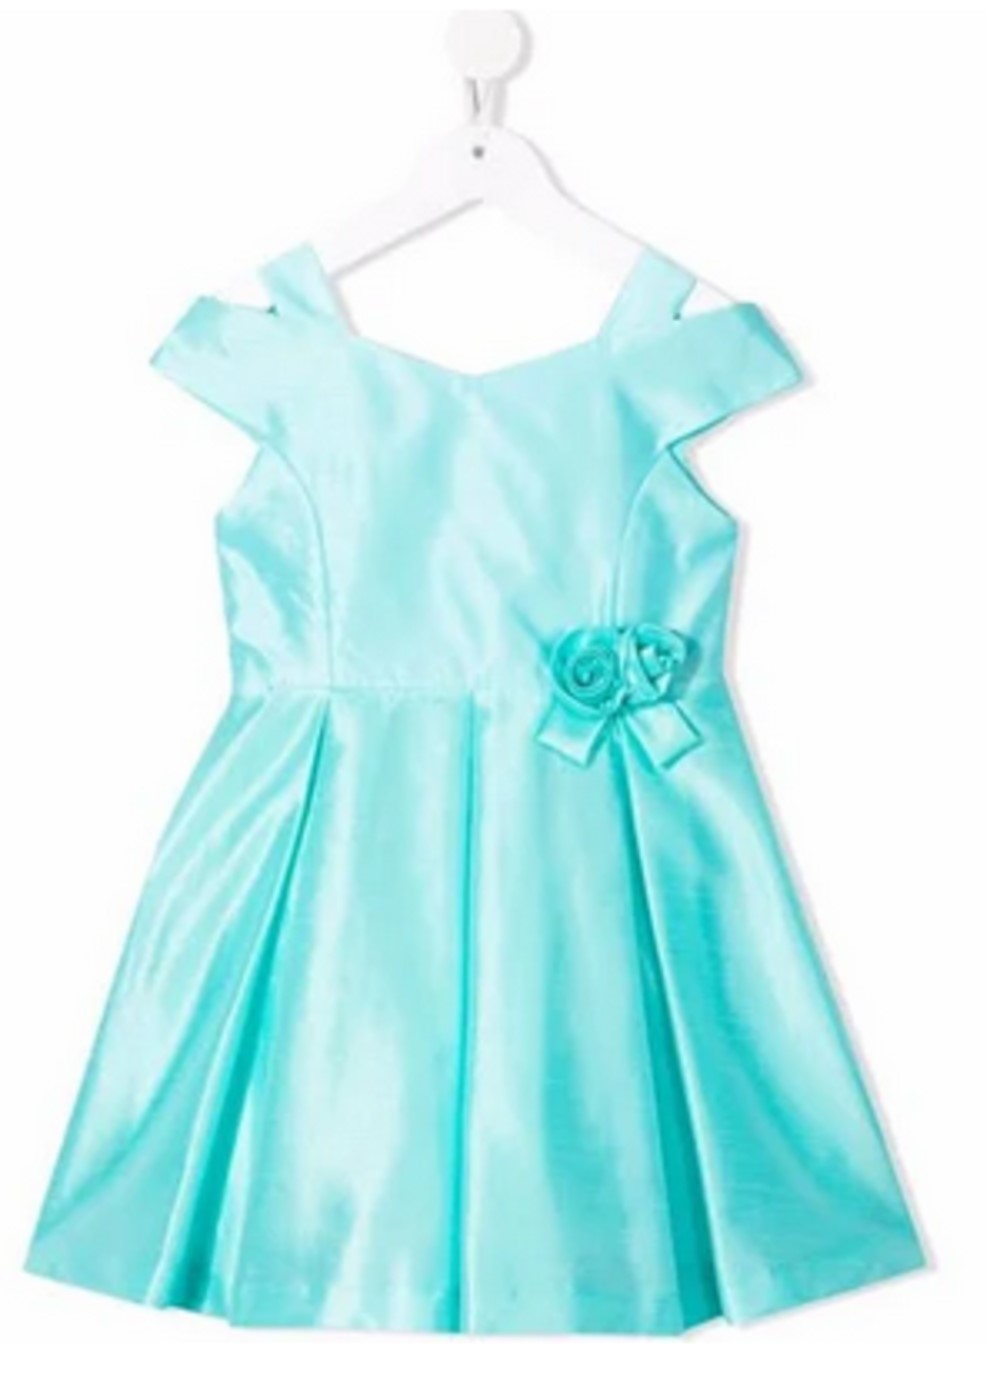 ABEL & LULA 5046 GIRLS TURQUOISE SHANTUNG SPECIAL OCCASION DRESS WITH BOW APPLIQUE